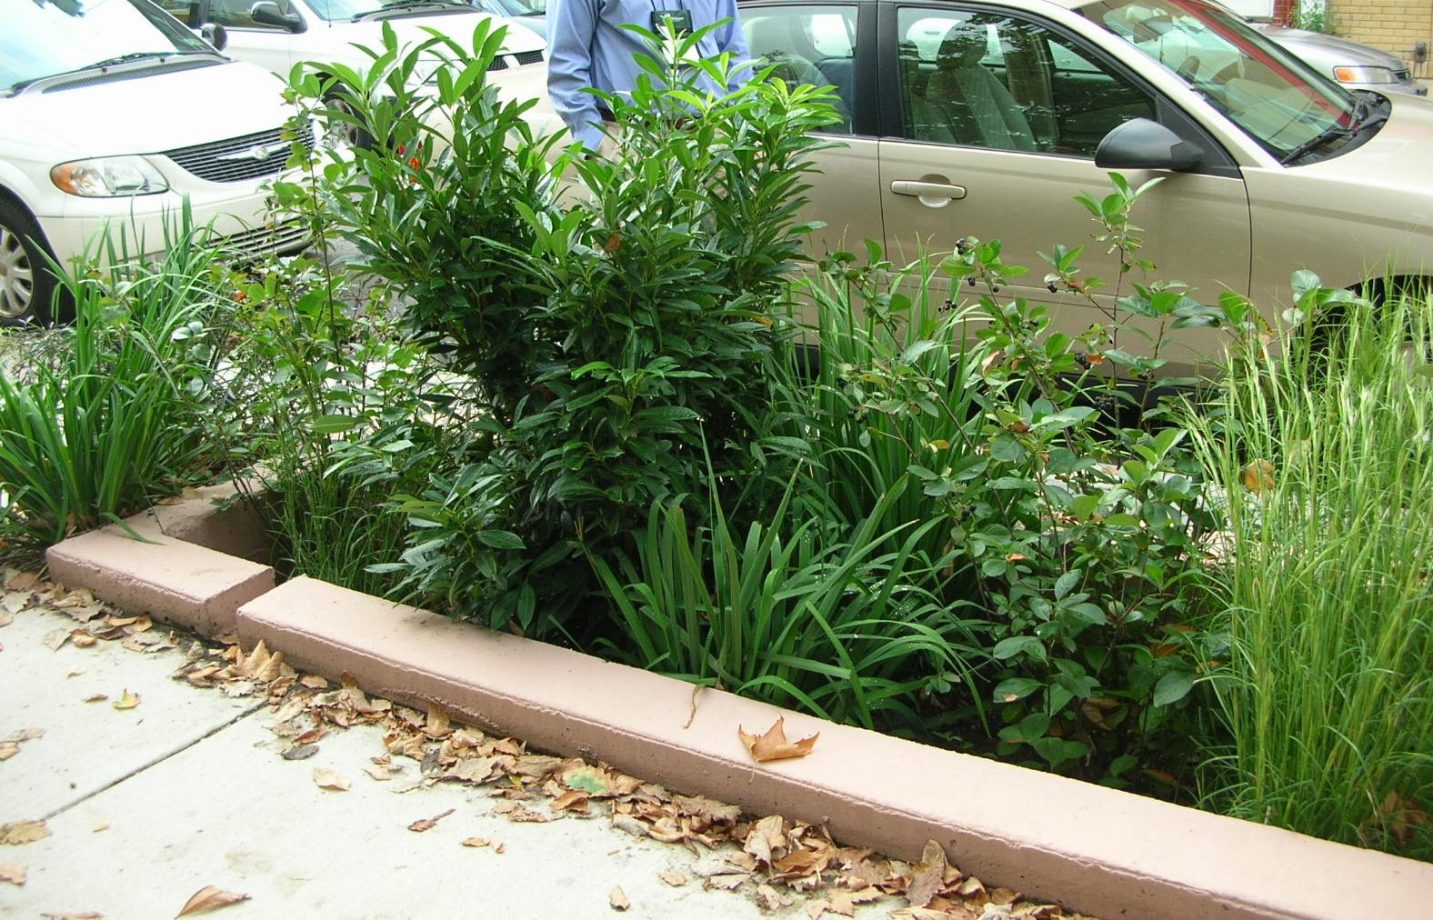 Stormwater planters installed by the Philadelphia Water Department